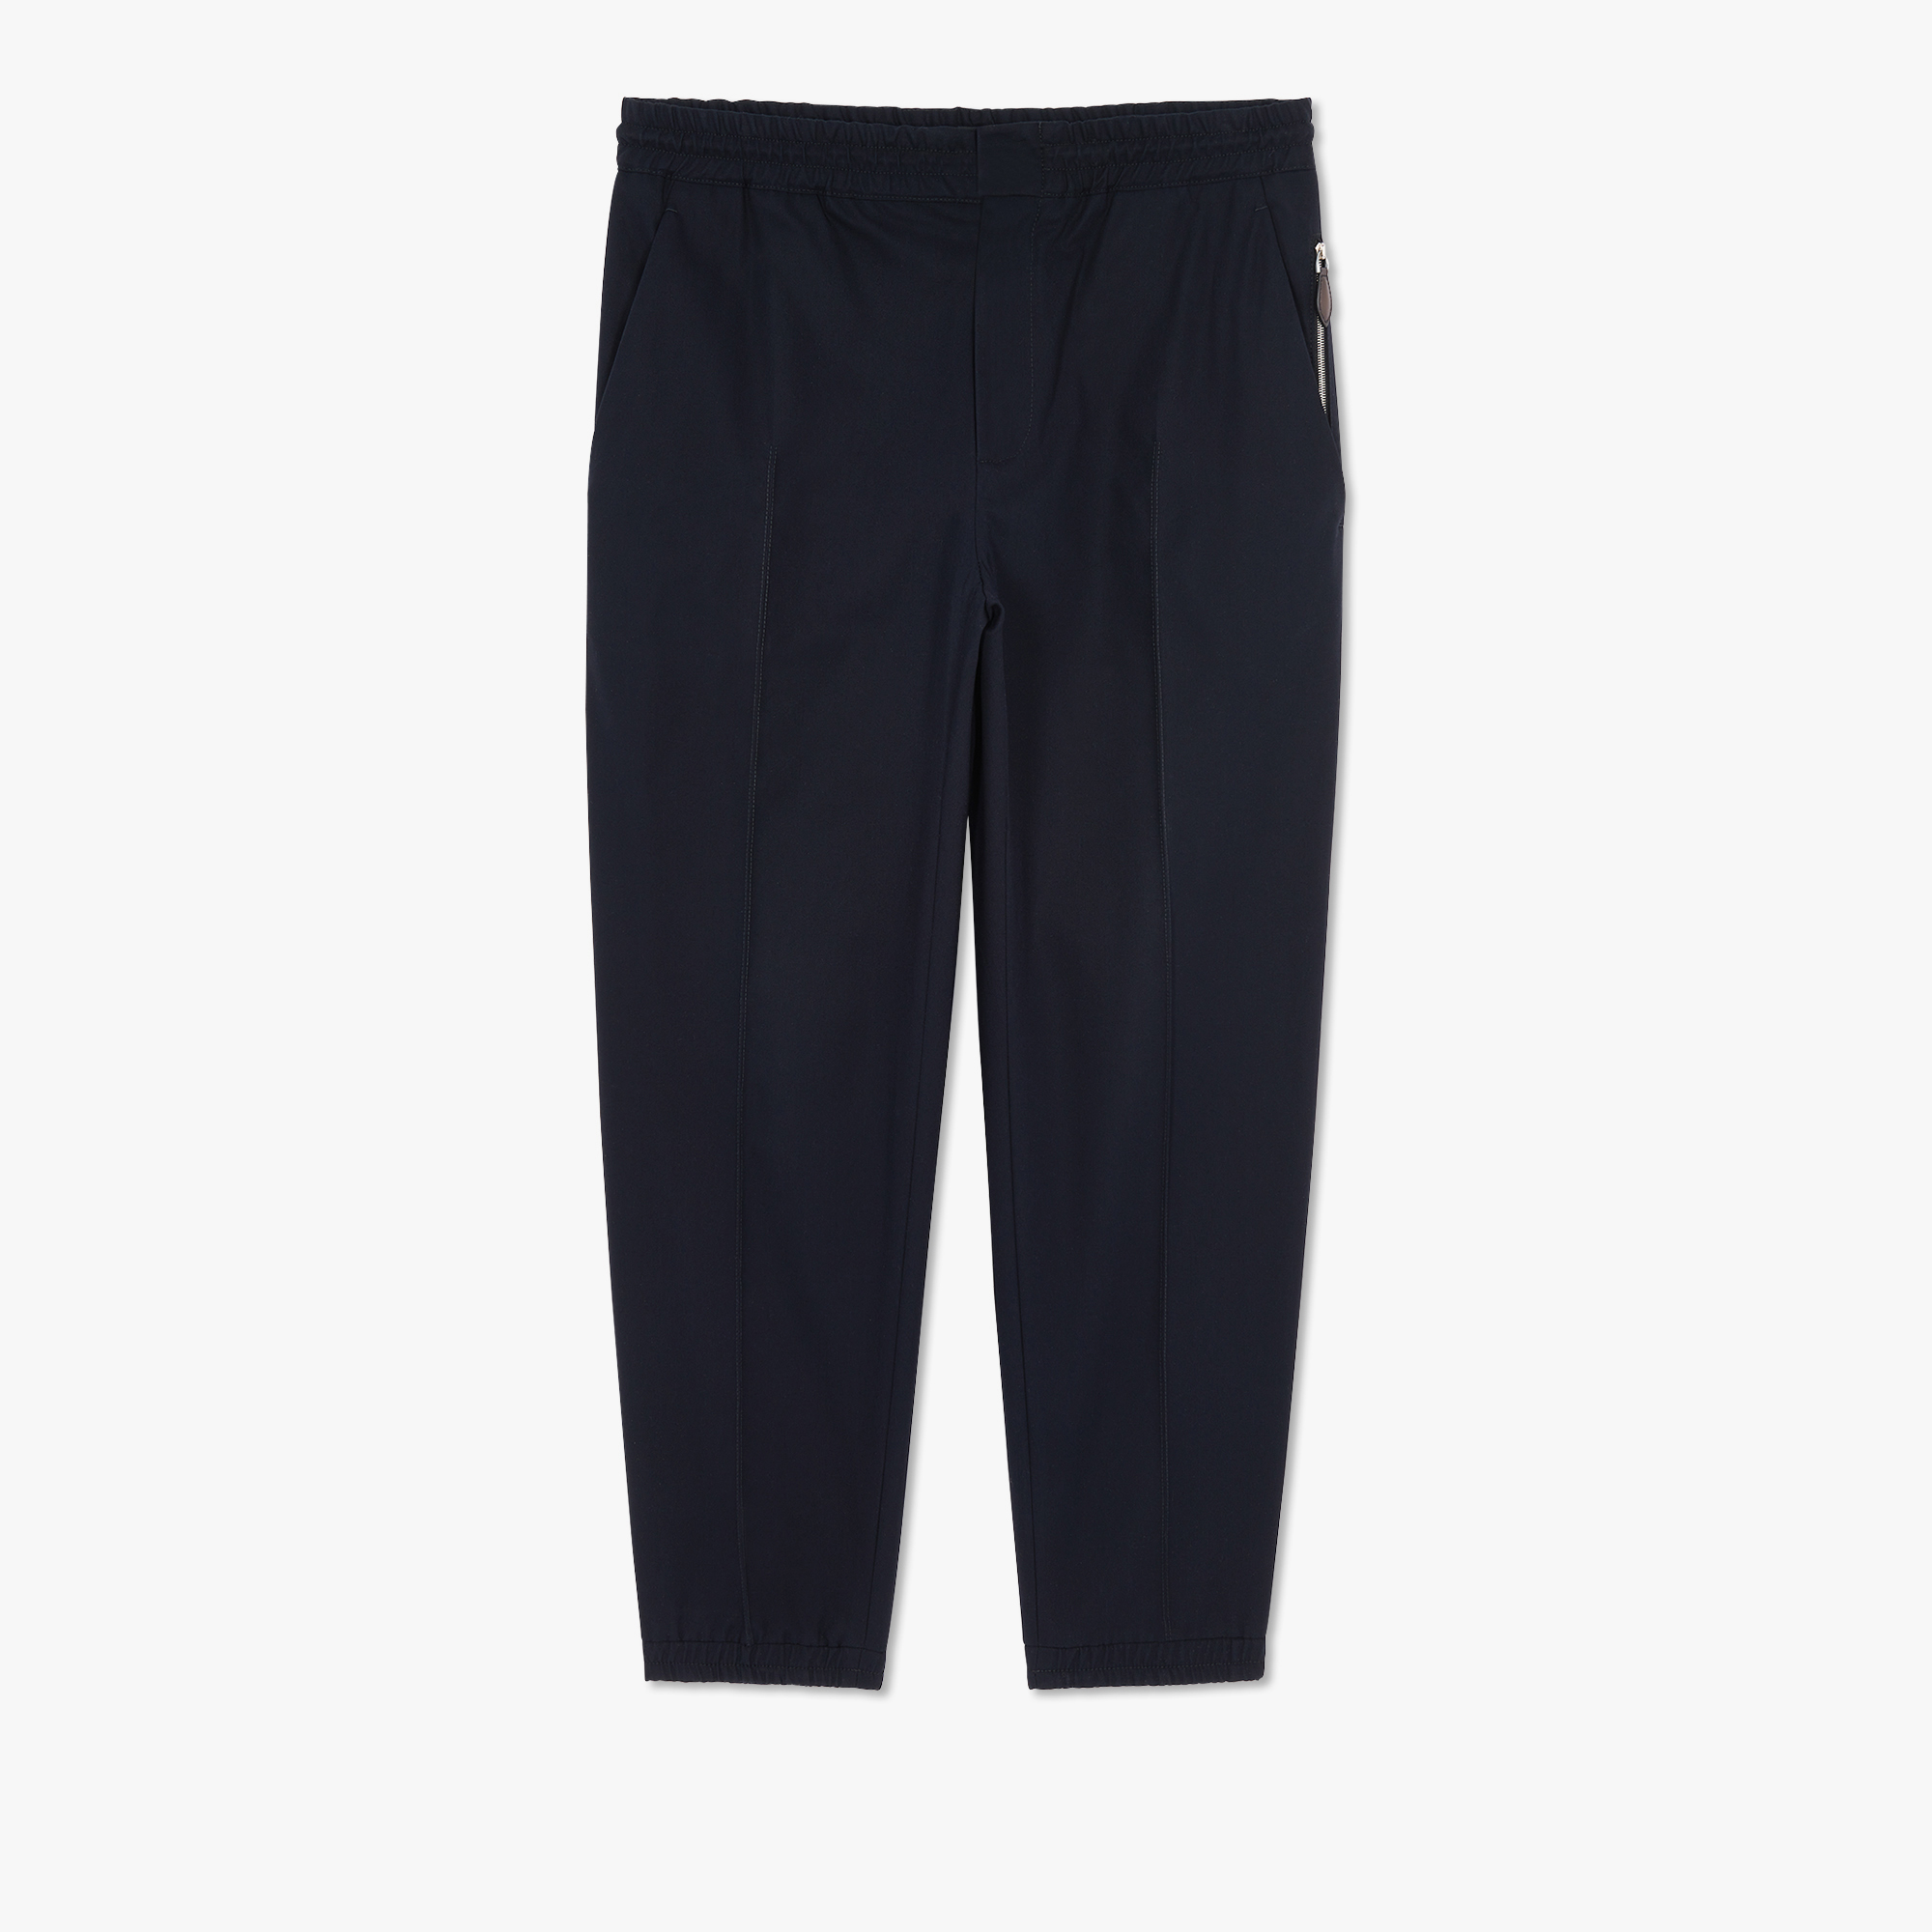 Cotton Jogging Trousers, COLD NIGHT BLUE, hi-res